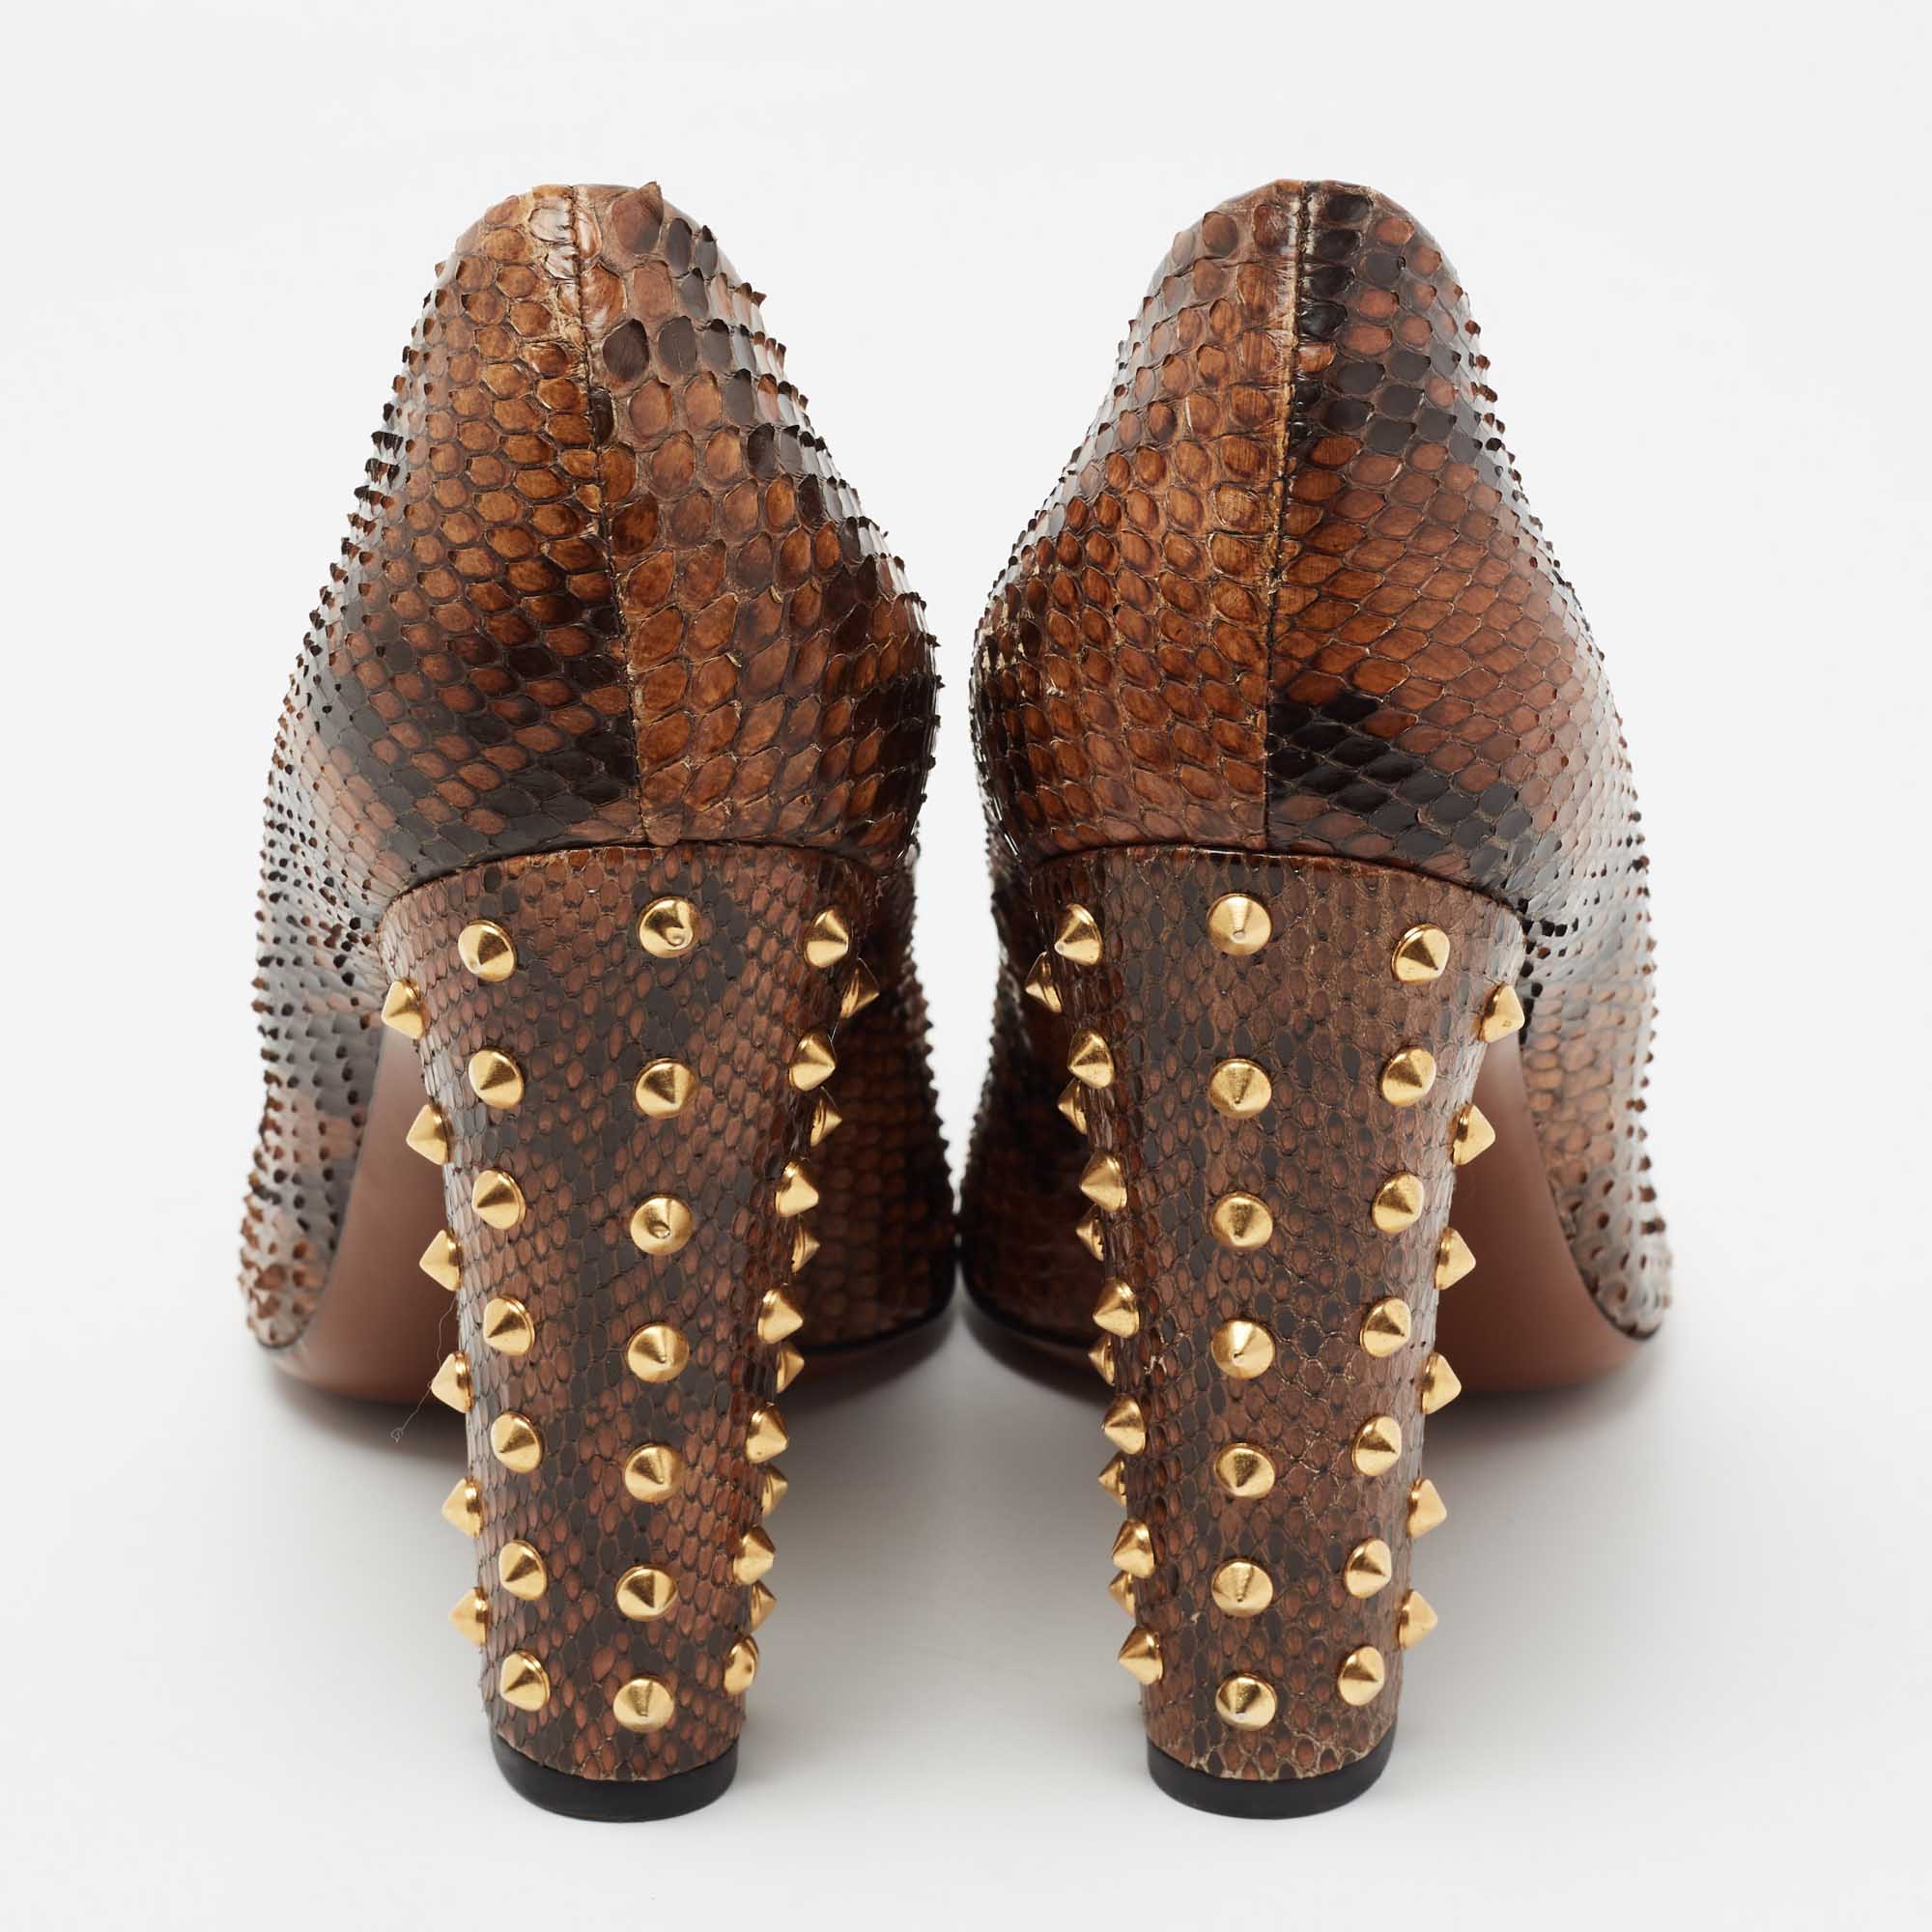 Gucci Brown/Black Python Leather Studded Heel Pumps Size 40